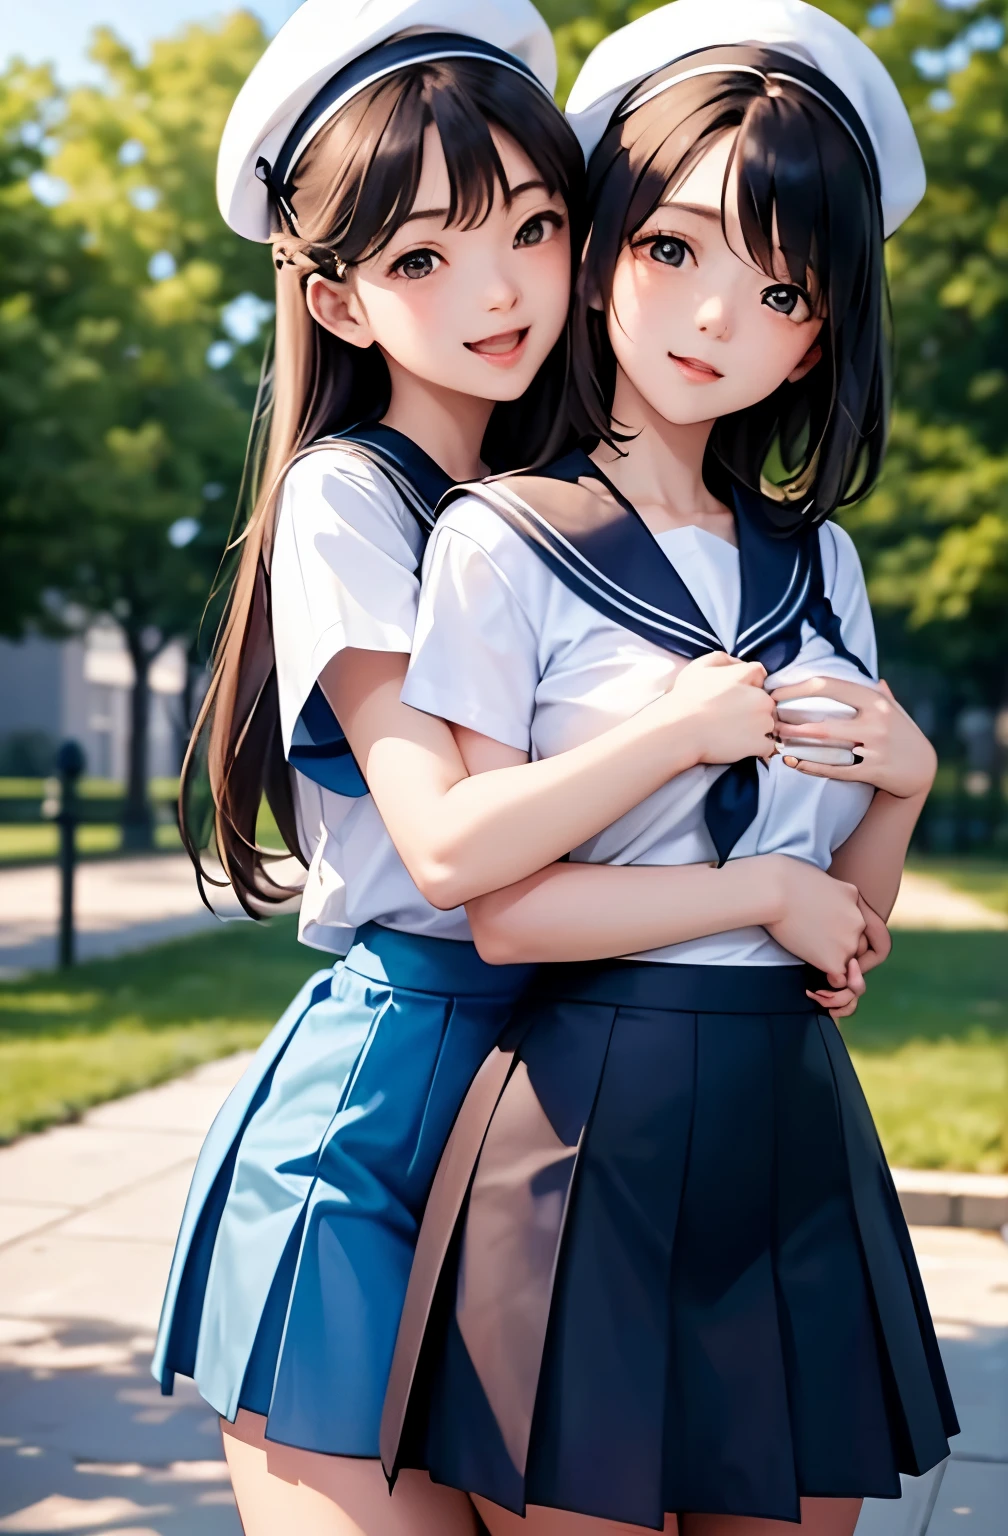 Two girls are playing and hugging each other from behind,,Cute junior high school girl like an angel,With a happy smile,Accurately drawn face,flat breast,tre anatomically correct,Precise fingers,A girl hugs another girl from behind and touches her breasts,,white mini sailor dress,White beret,They both wear matching clothes....,her skirt is pulled up、Blue pants are peeking out a little..,healthy,Active Poses and Angles,In a well-lit park,​masterpiece,hiquality,